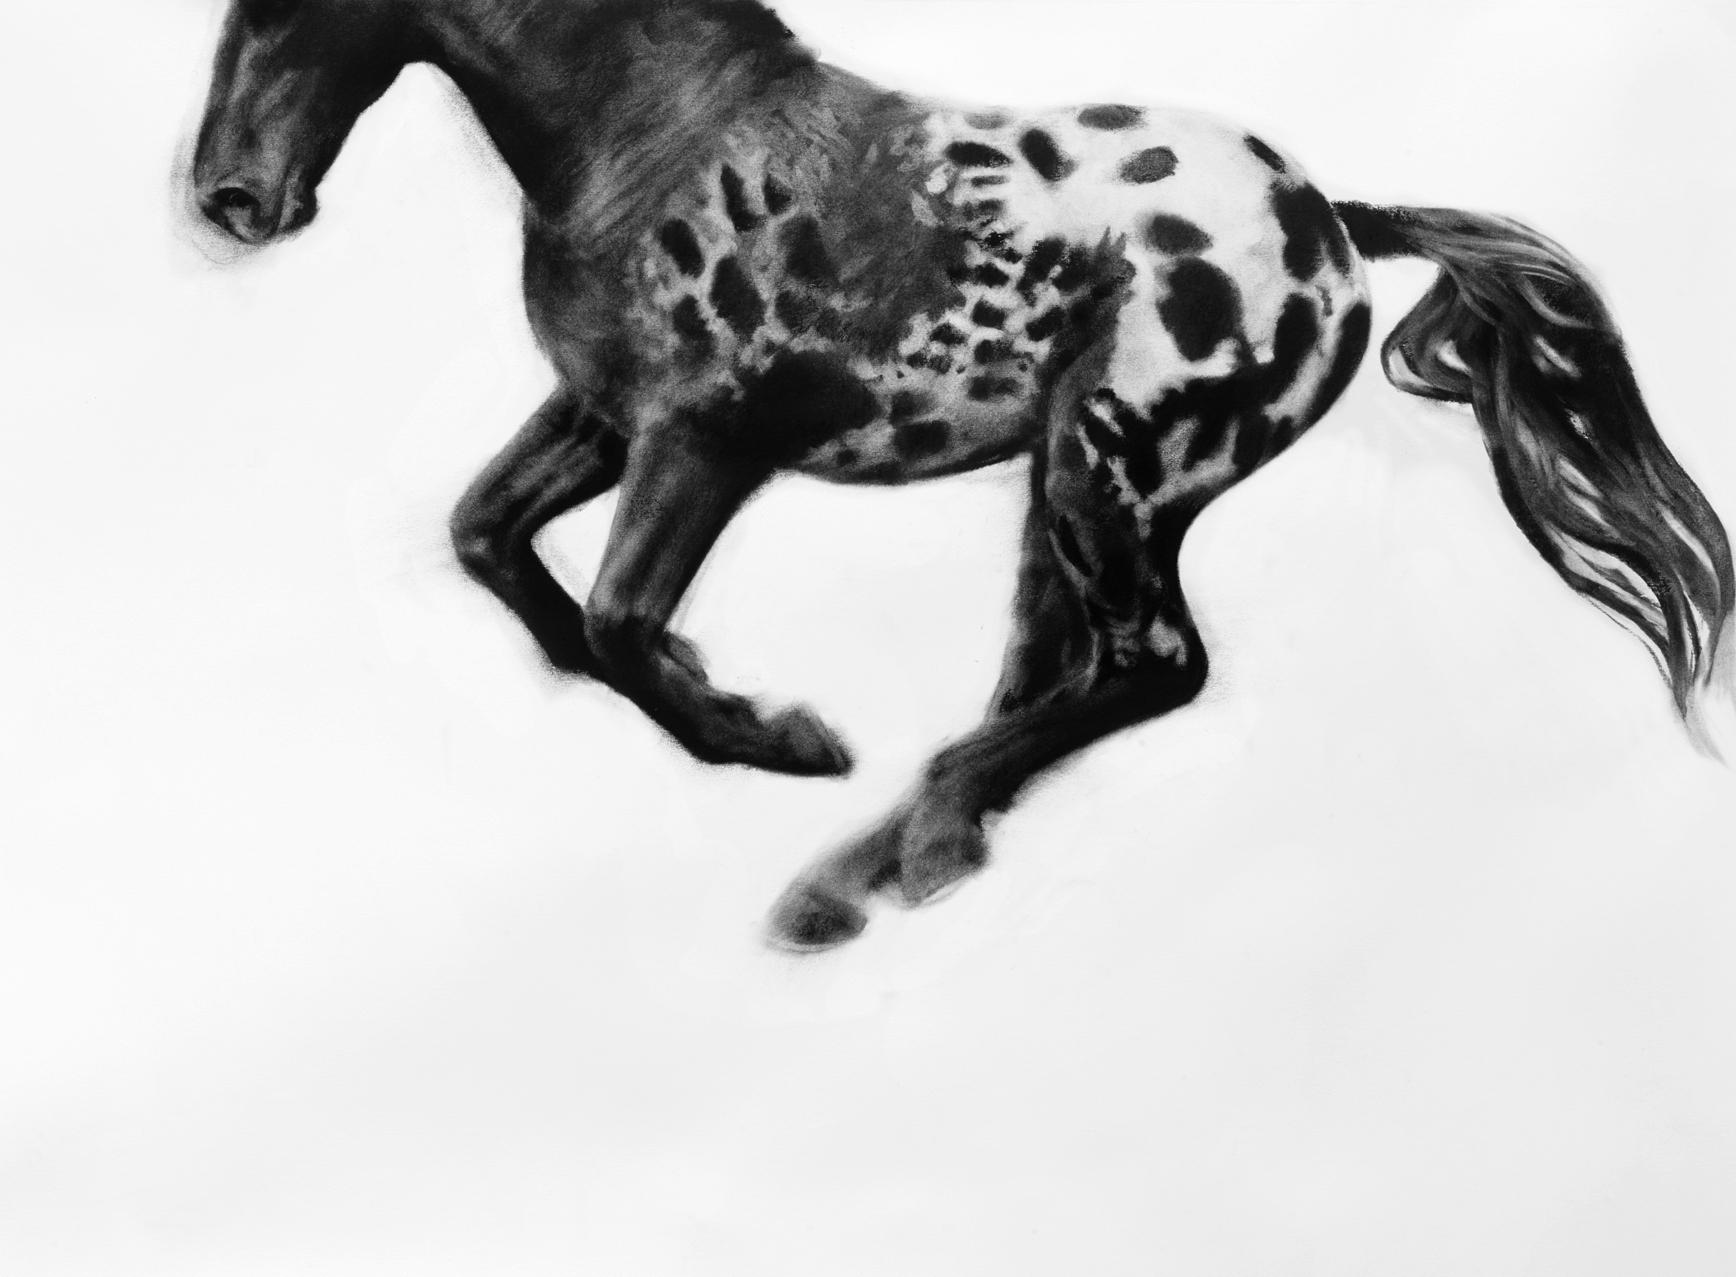 Hocus Focus, dynamic realistic Horse drawing, charcoal on paper - Painting by Patsy McArthur